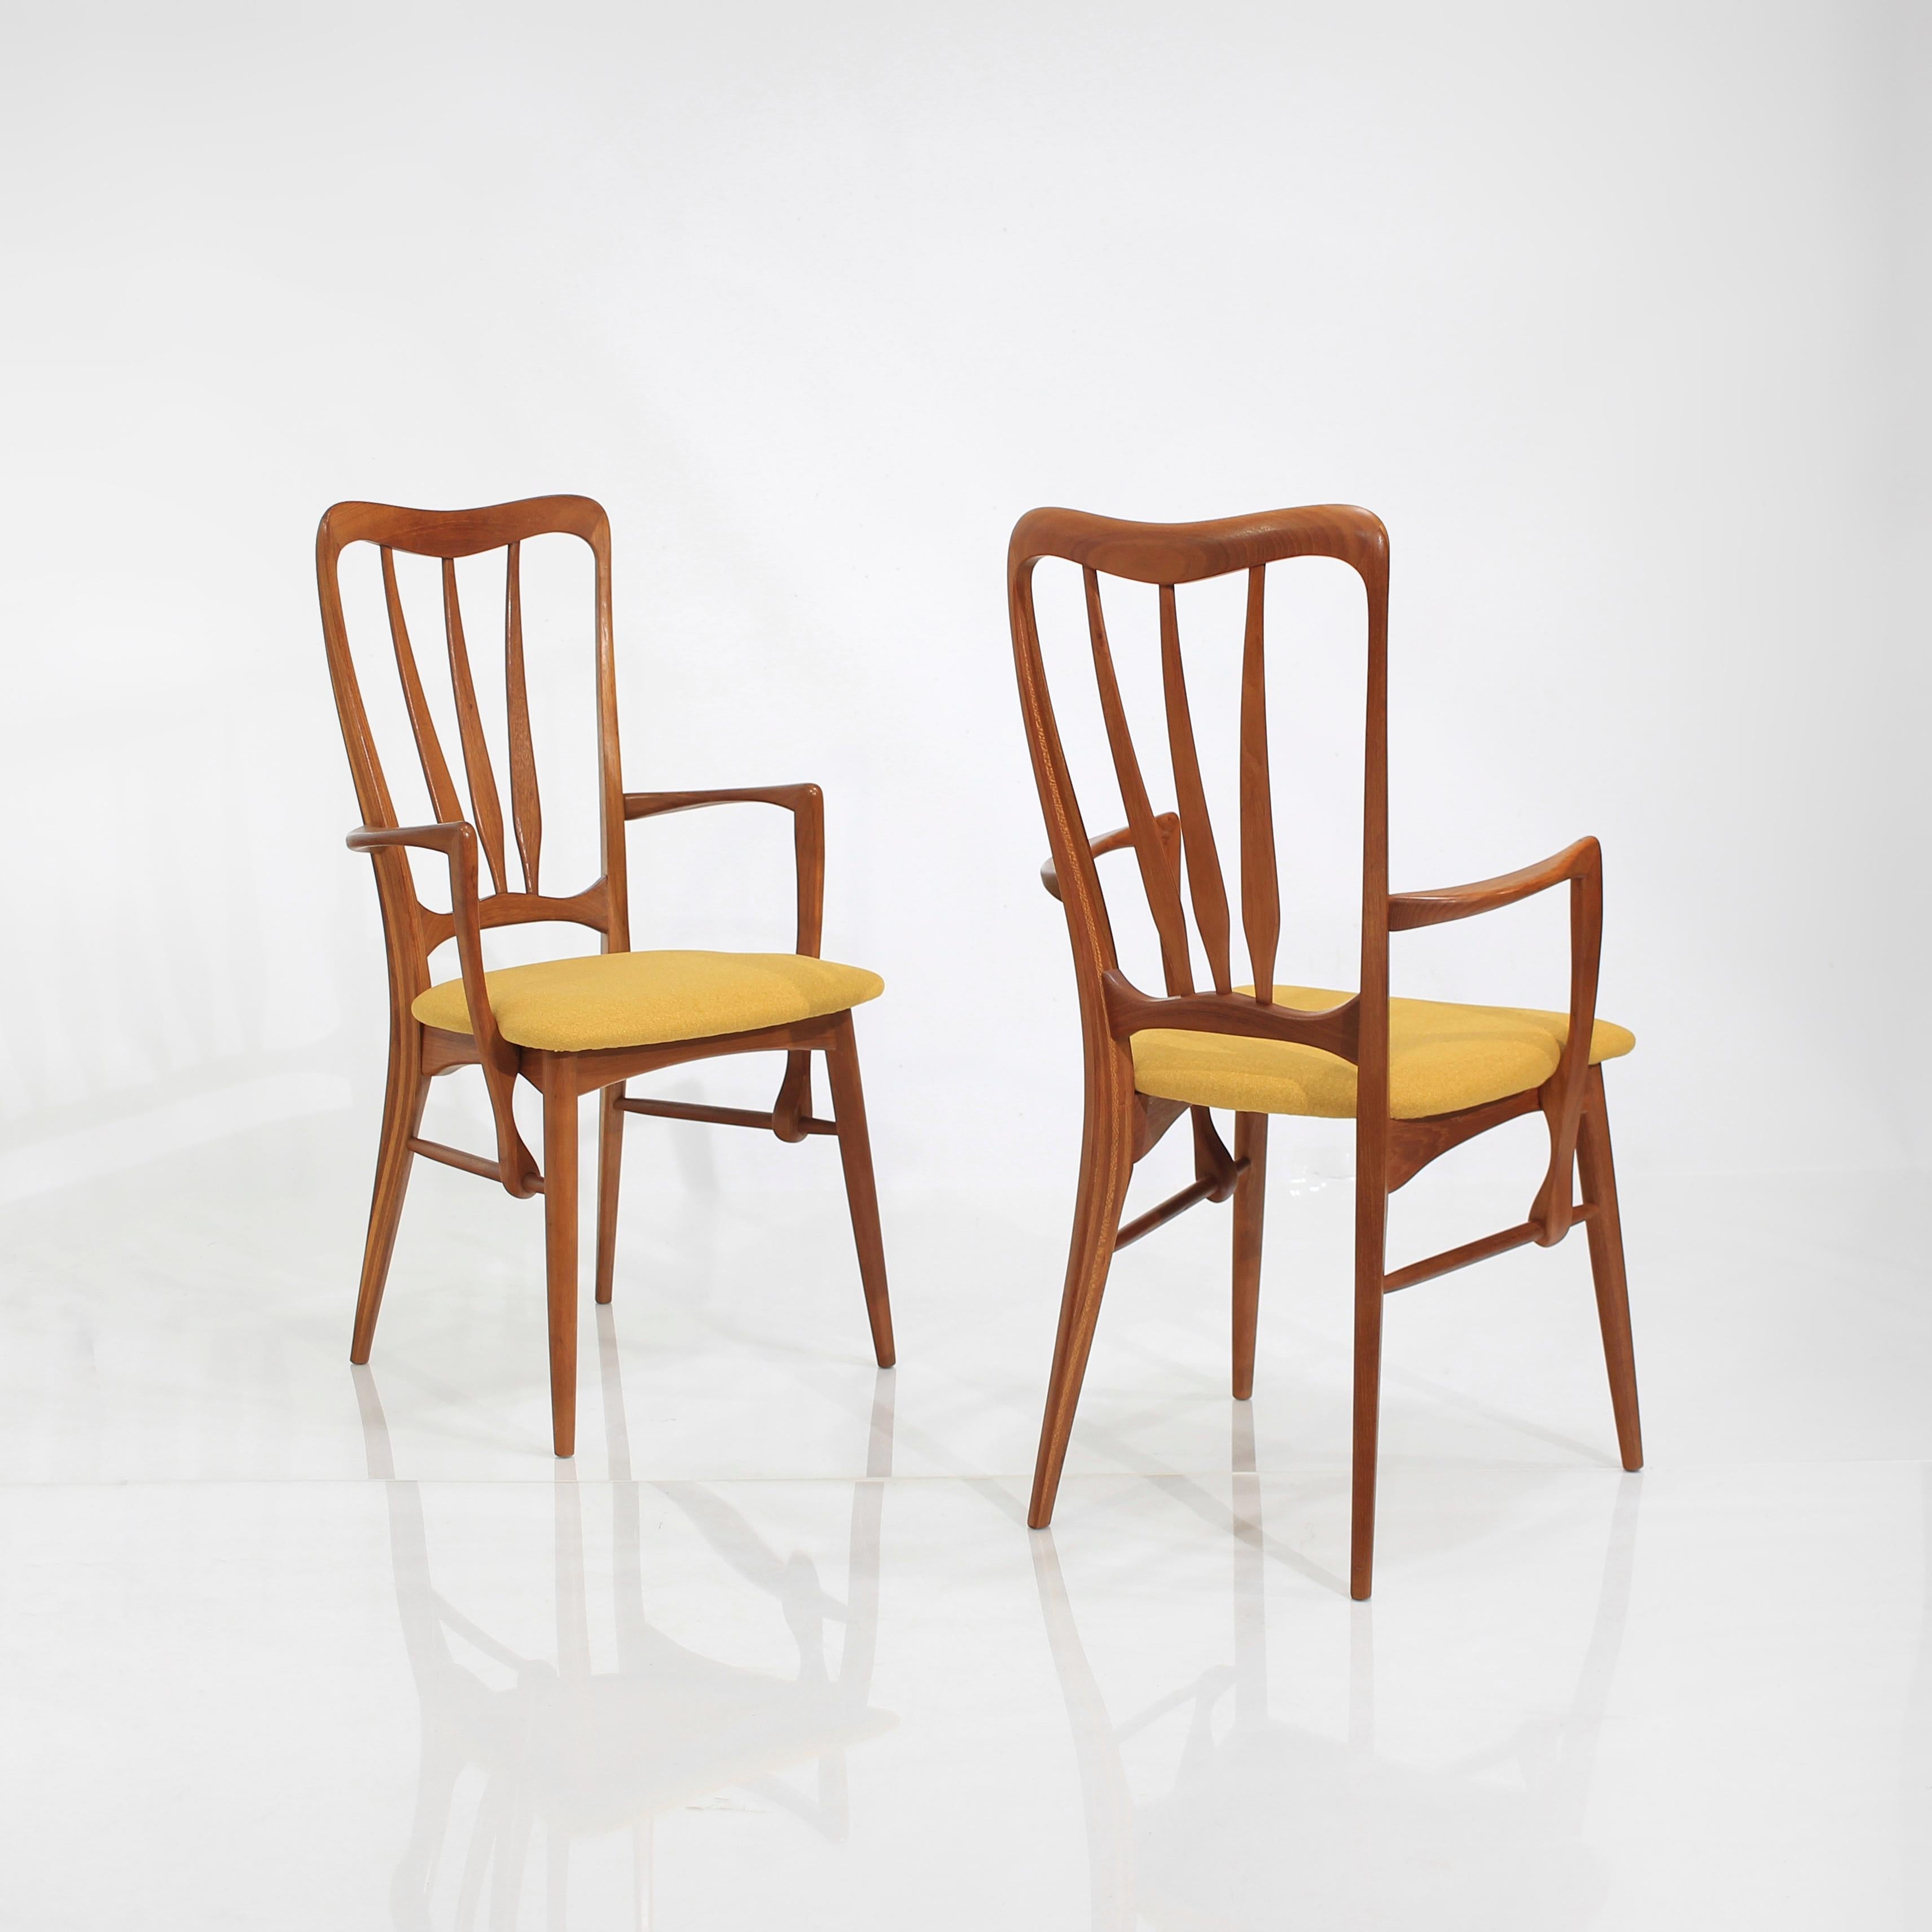 Presenting this stunning pair of Teak ‘Ingrid’ Dining Chair Armchairs by Niels Koefoed for Koefoeds Hornslet.

Displaying captivating lines and contoured support that hugs your back in all the right places.

In Excellent vintage condition.  Frames